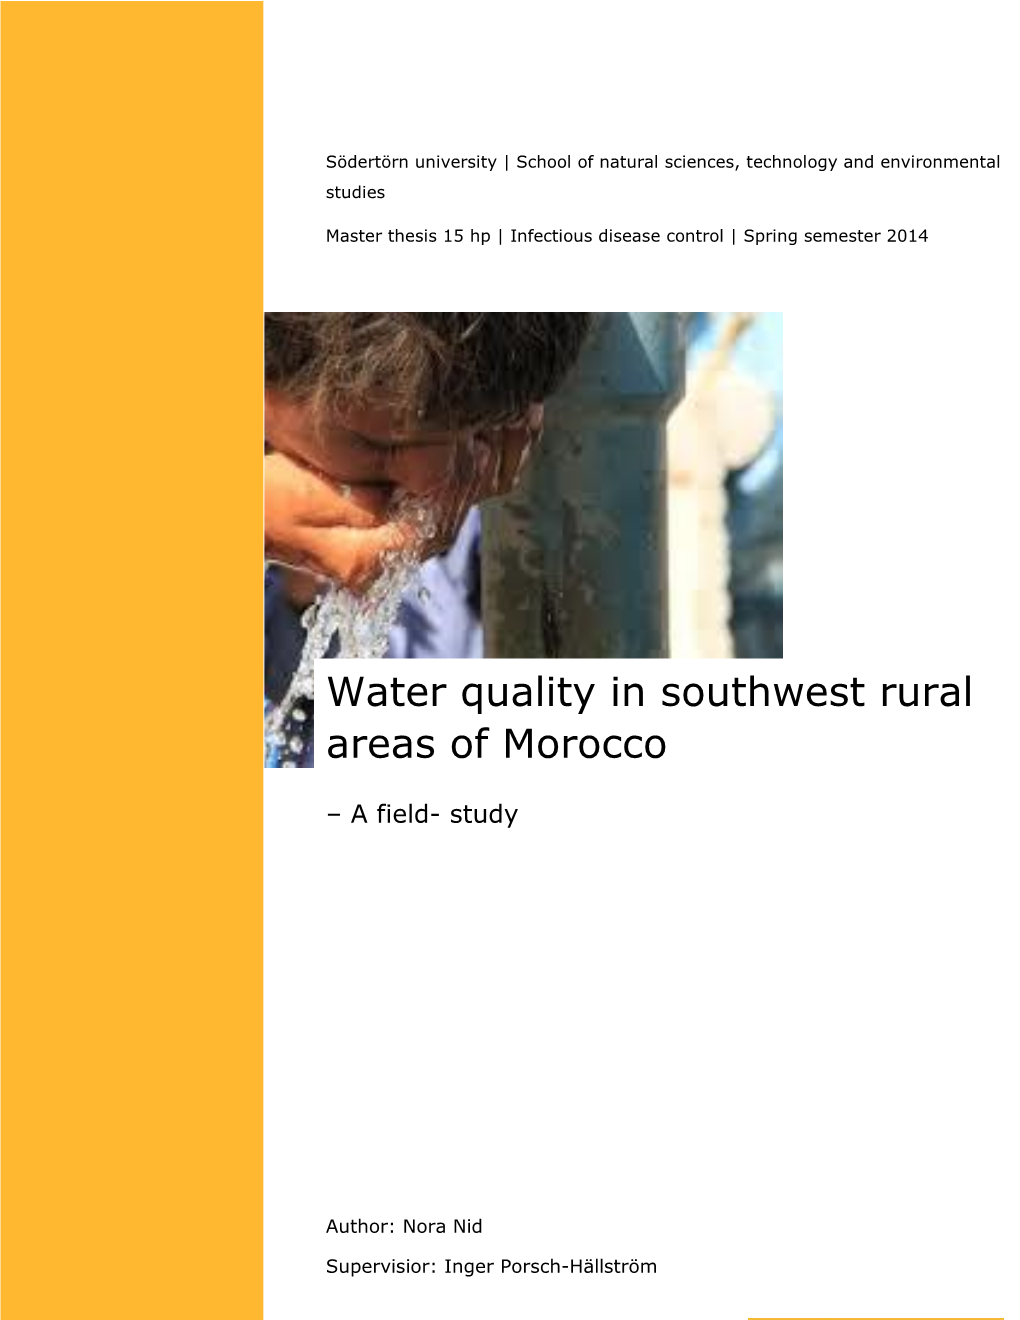 Water Quality in Southwest Rural Areas of Morocco